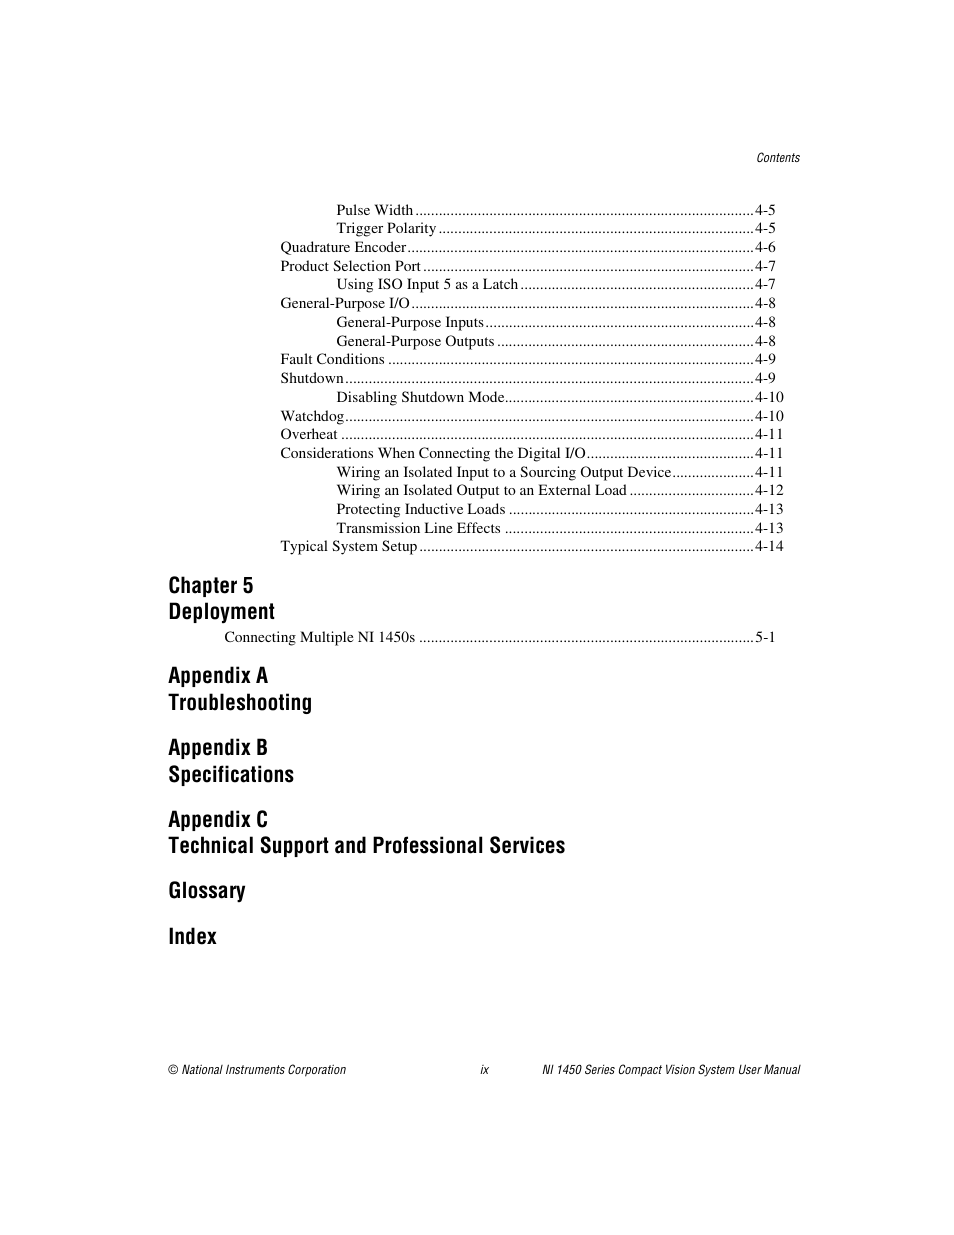 Chapter 5 deployment | National Instruments NI 1450 Series User Manual | Page 8 / 83